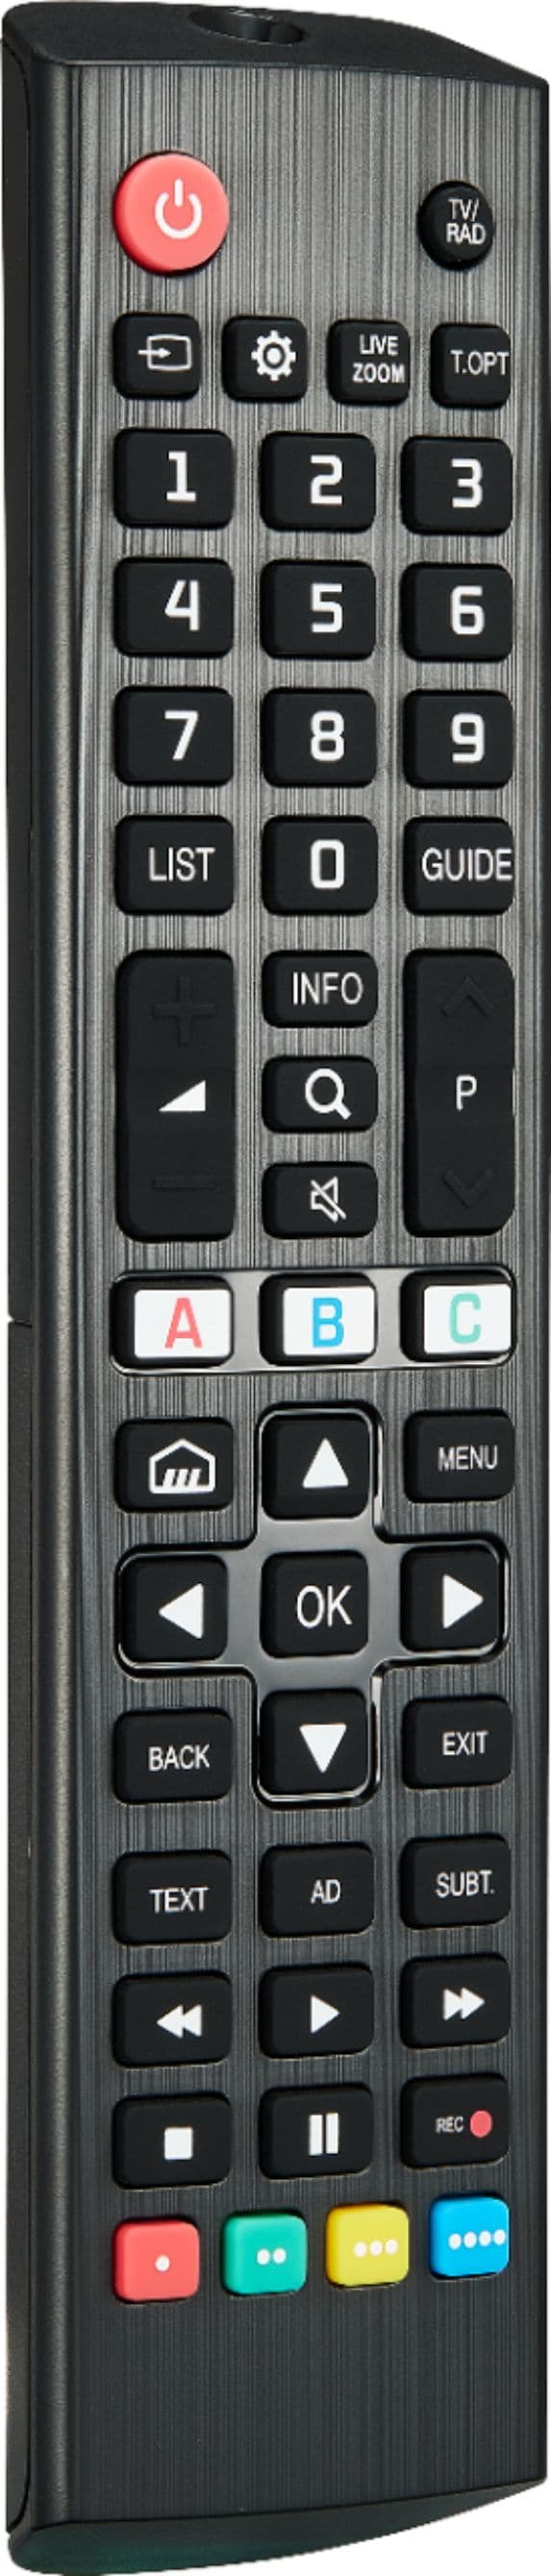 Insignia™ - Replacement Remote for LG TVs - Black_2